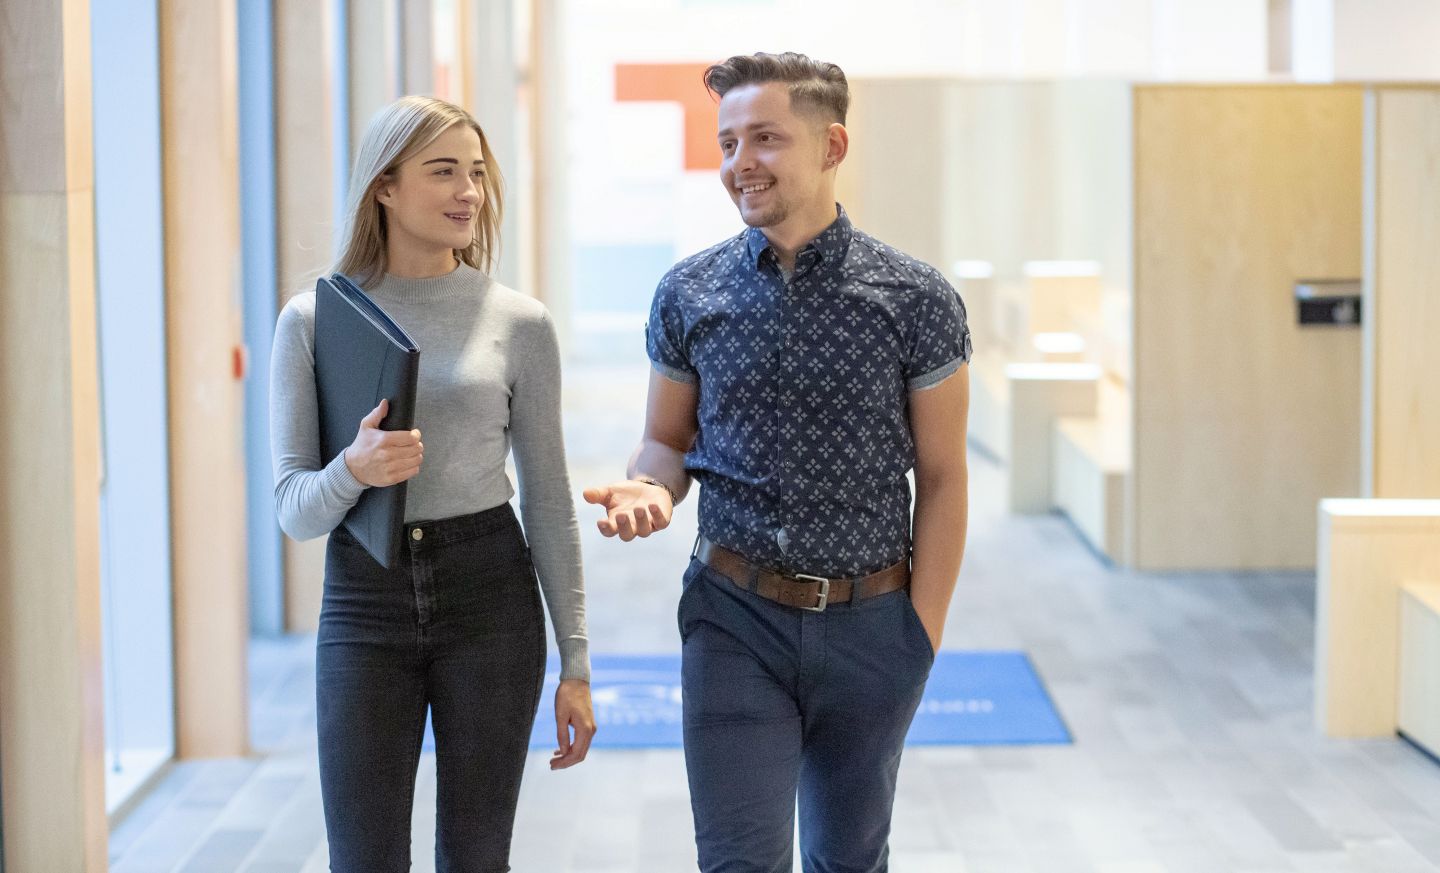 Two BA (Hons) International Business students walking on Glasgow campus in November 2018.